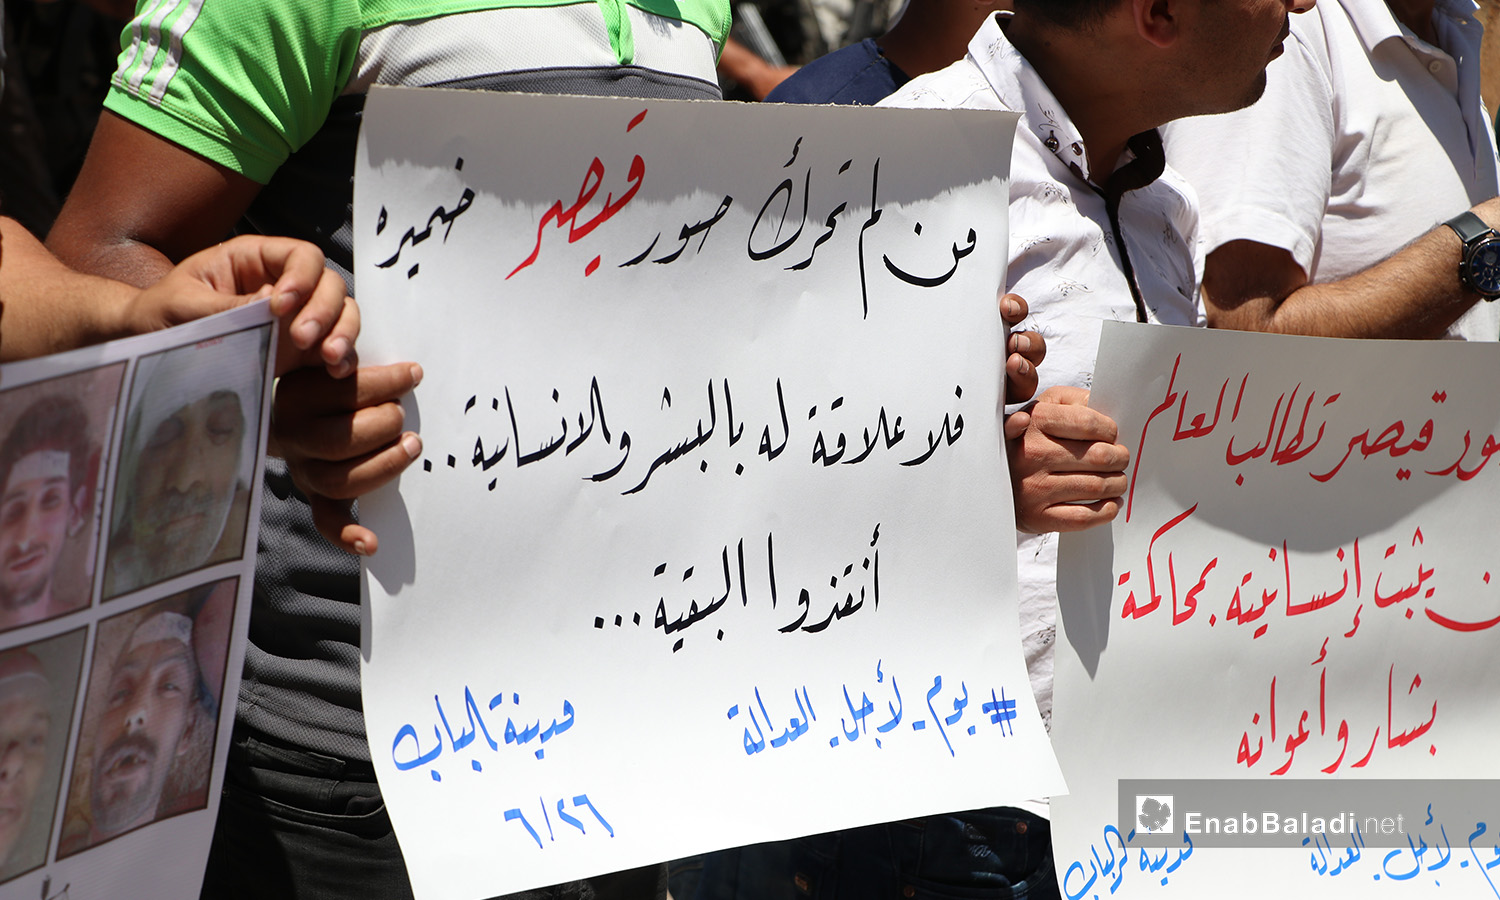 The residents of al-Bab city of eastern Aleppo organize a protest stand in solidarity with Syrian detainees under the slogan “Day for Justice”– 26 June 2020 (Enab Baladi / Asim Melhem)